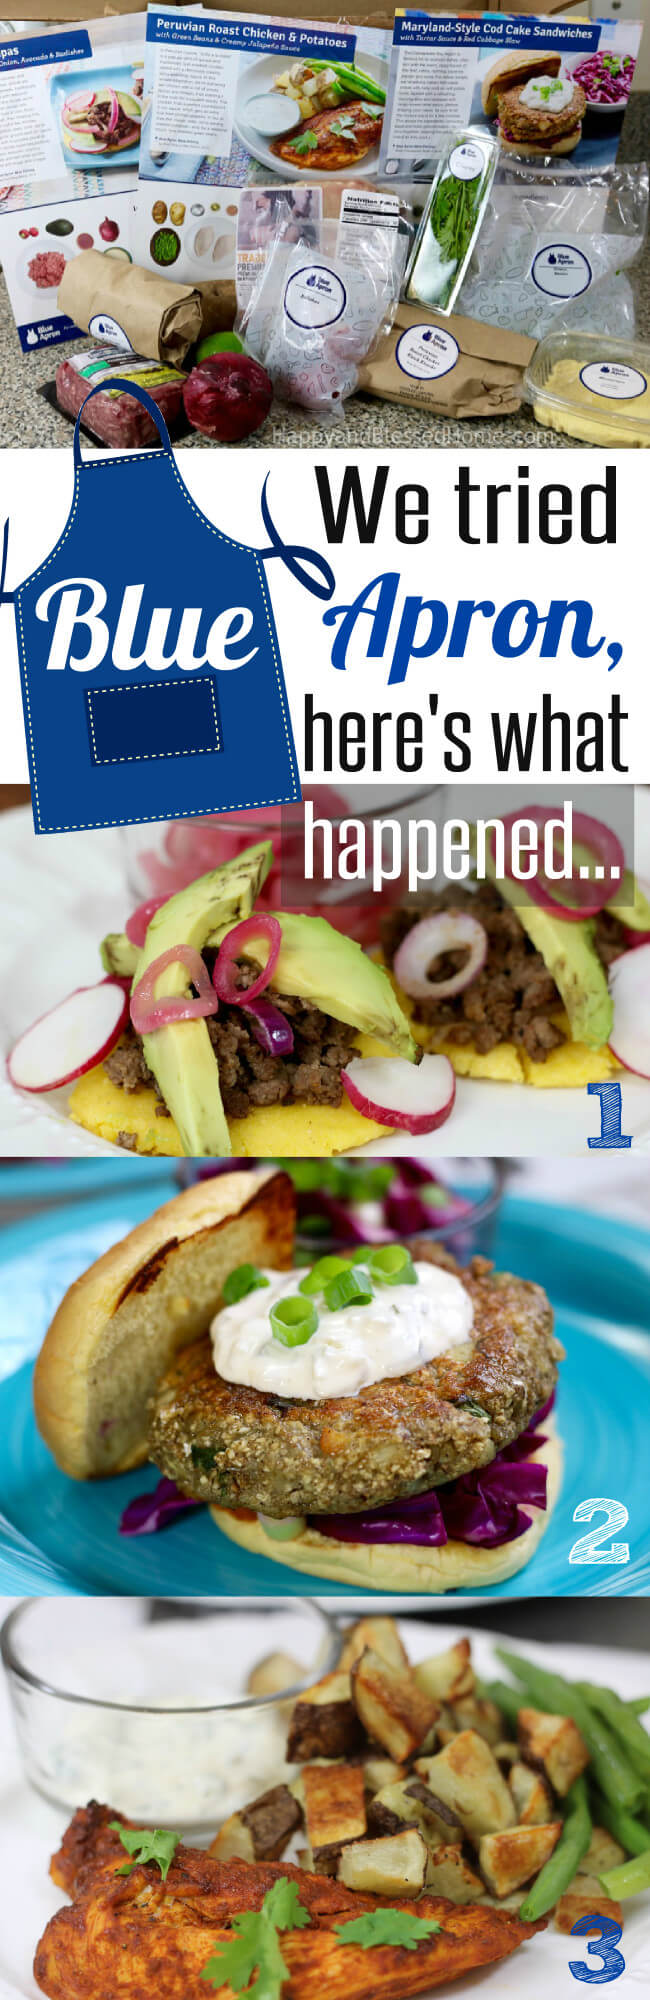 We tried Blue Apron and here is what happened - review by HappyandBlessedHome.com